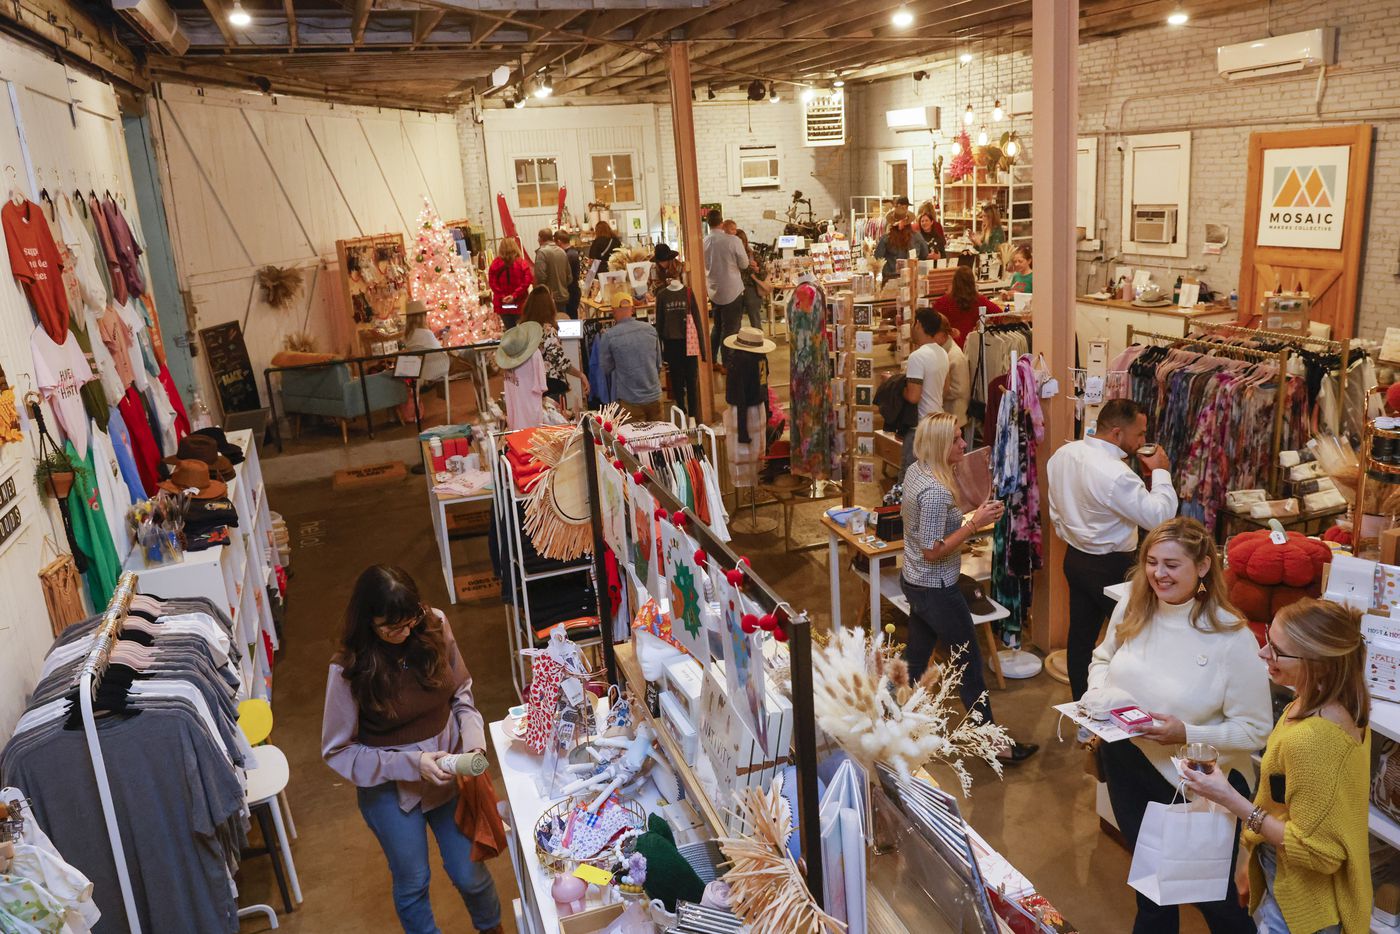 Holiday shoppers at the Mosaic Makers Collective.